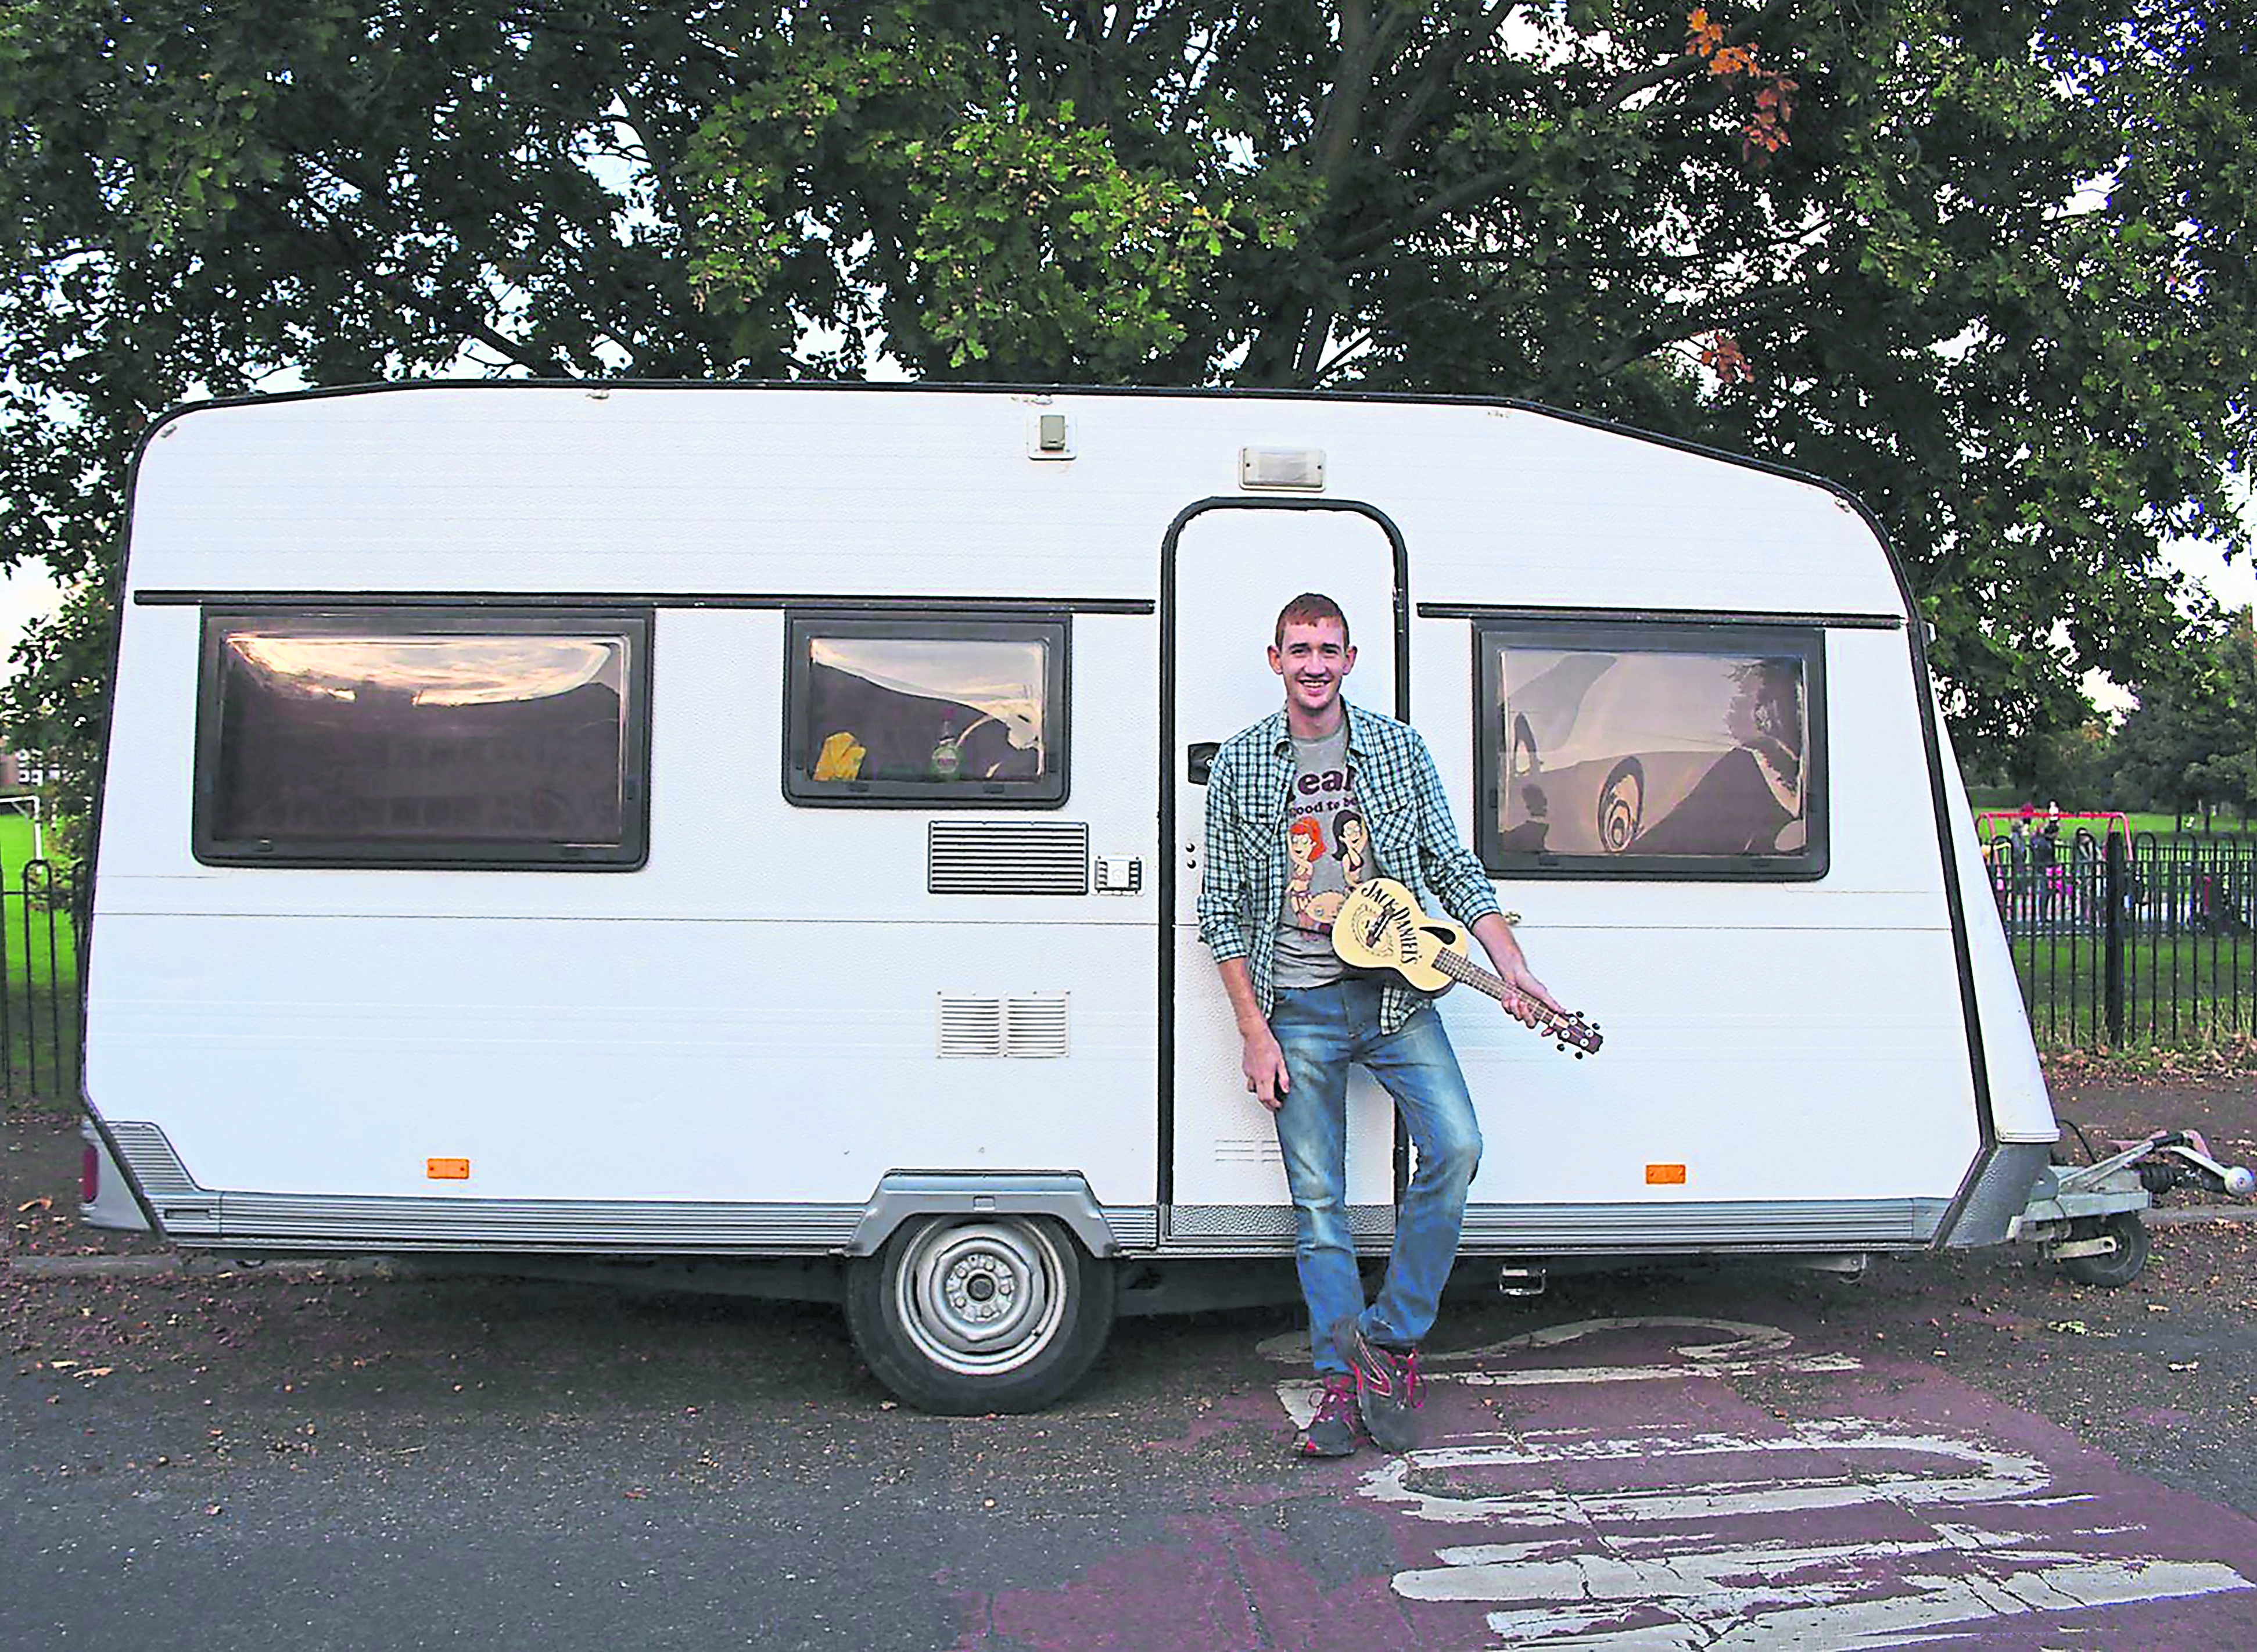 From Seething Wells to a home on wheels